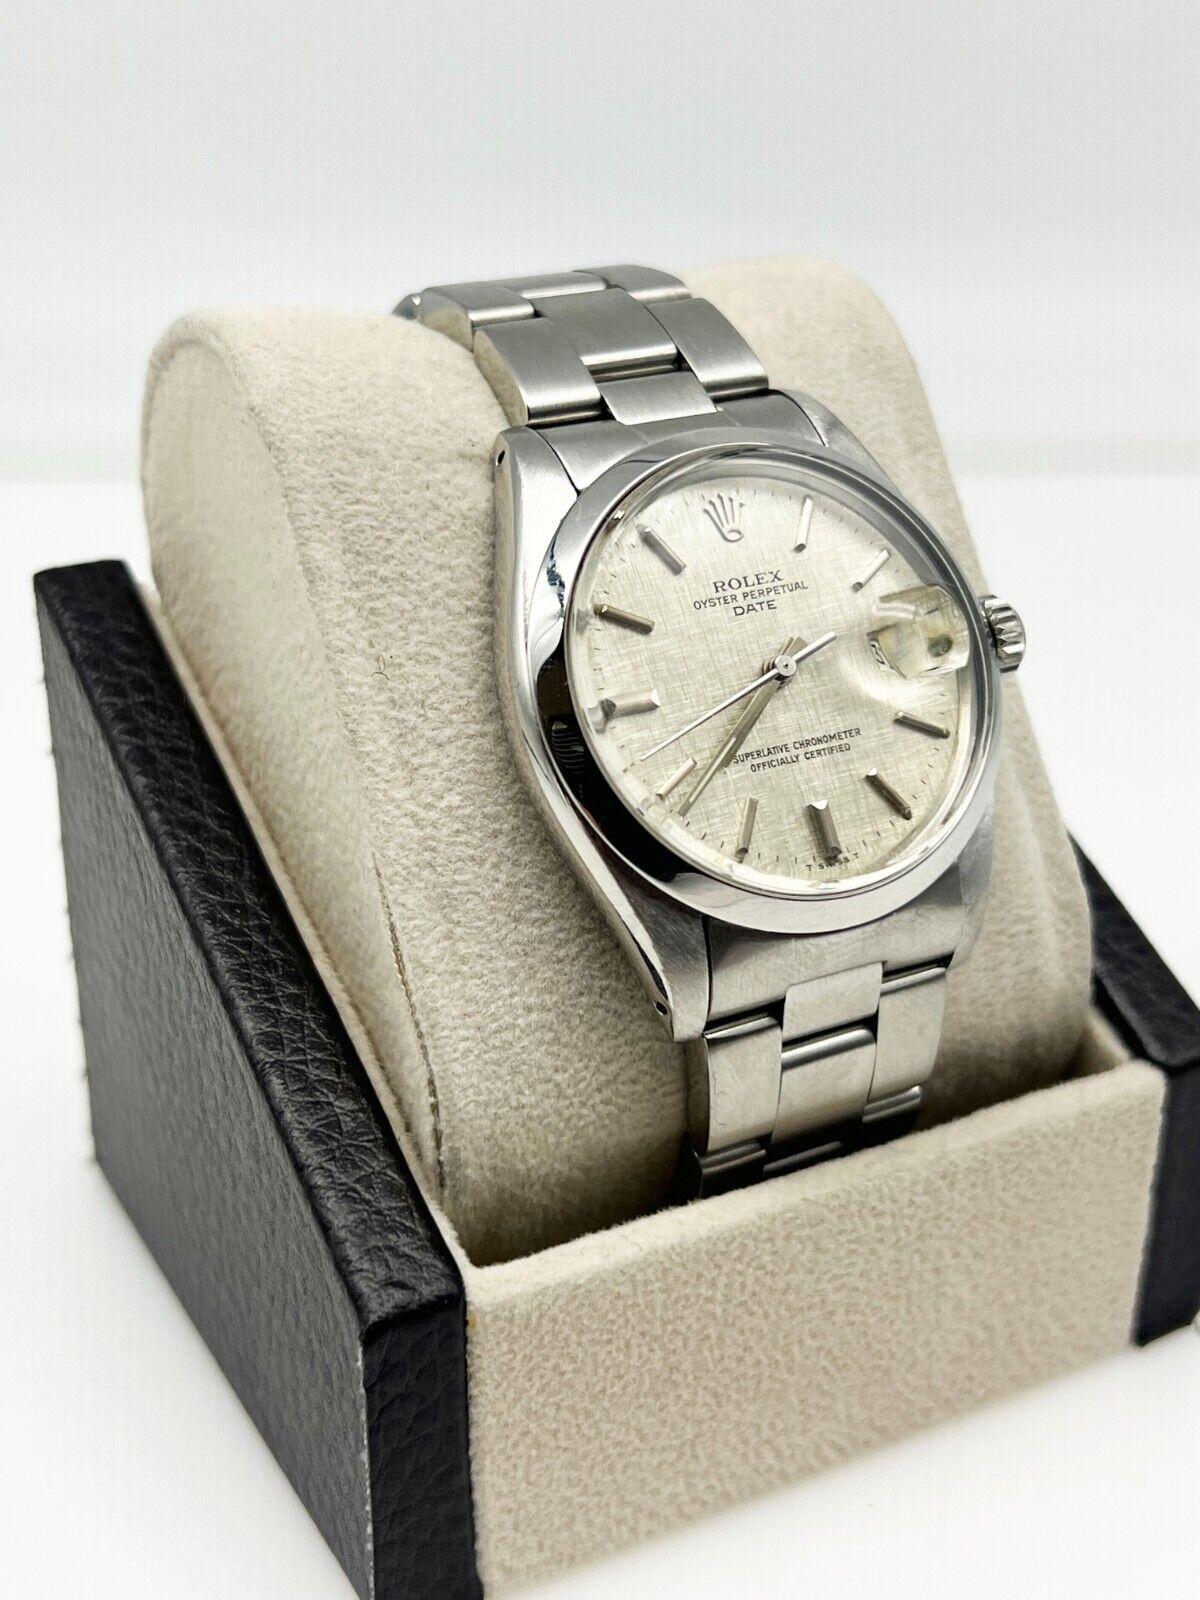 Style Number: 1500 

Serial: 5087***

Year: 1978 

Model: Date 

Case Material: Stainless Steel  

Band: Stainless Steel  

Bezel: Stainless Steel  Smooth Bezel  

Dial: Silver Linen Dial 

Face: Acrylic

Case Size: 34mm 

Includes: 

-Elegant Watch